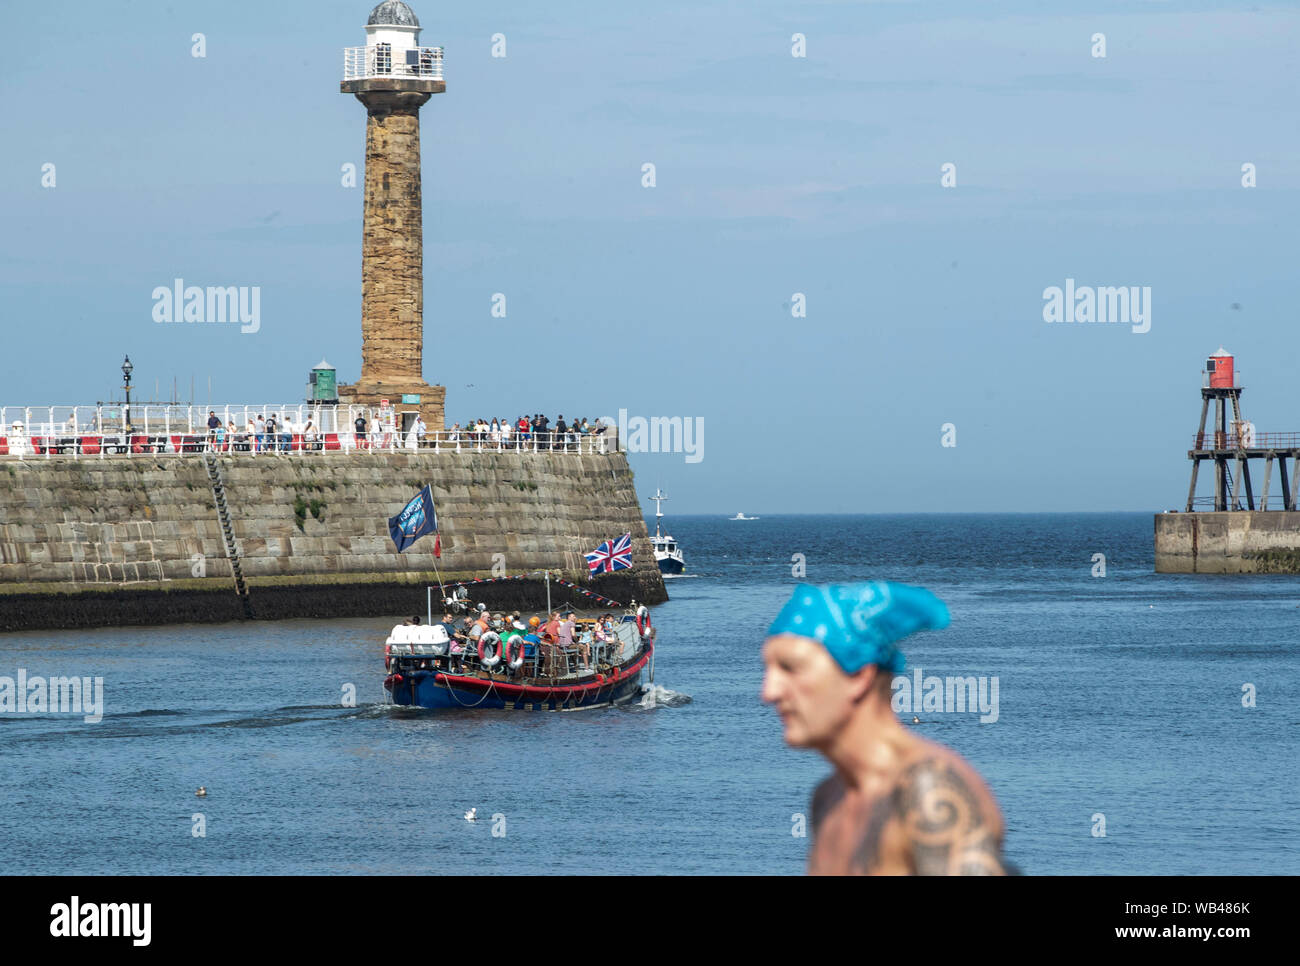 The harbour at Whitby in Yorkshire, as a bank holiday heatwave will see most of the country sizzling in sunshine with possible record temperatures, the Met Office has said. Stock Photo